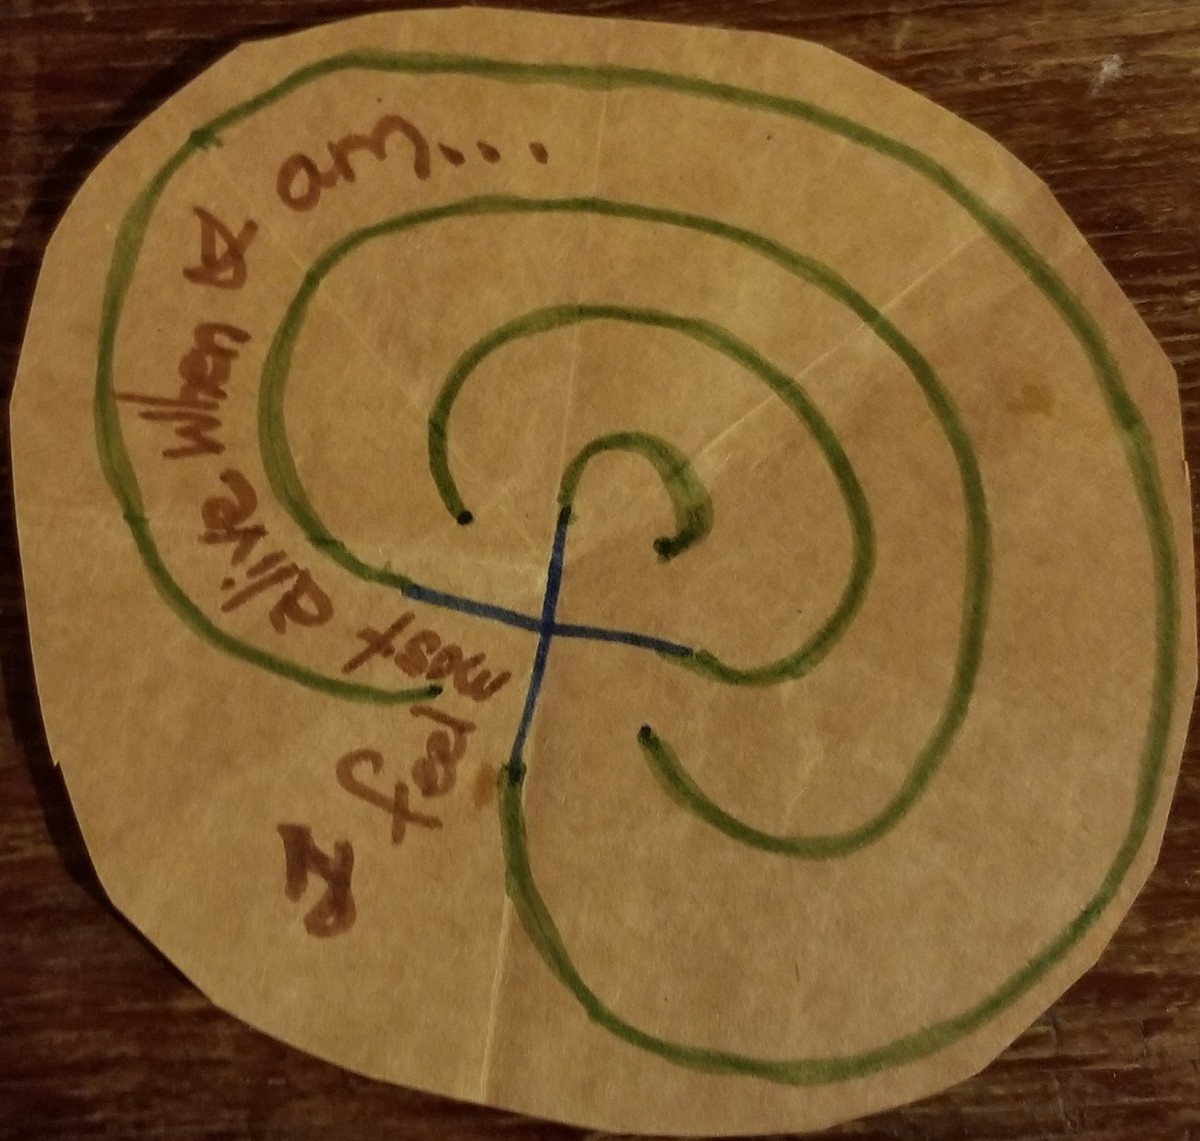 A labyrinth path drawn on paper to walk with your finger, then write on as a journal entry. I drew a bunch and left them for my neighbors in a visible place at our Common House.